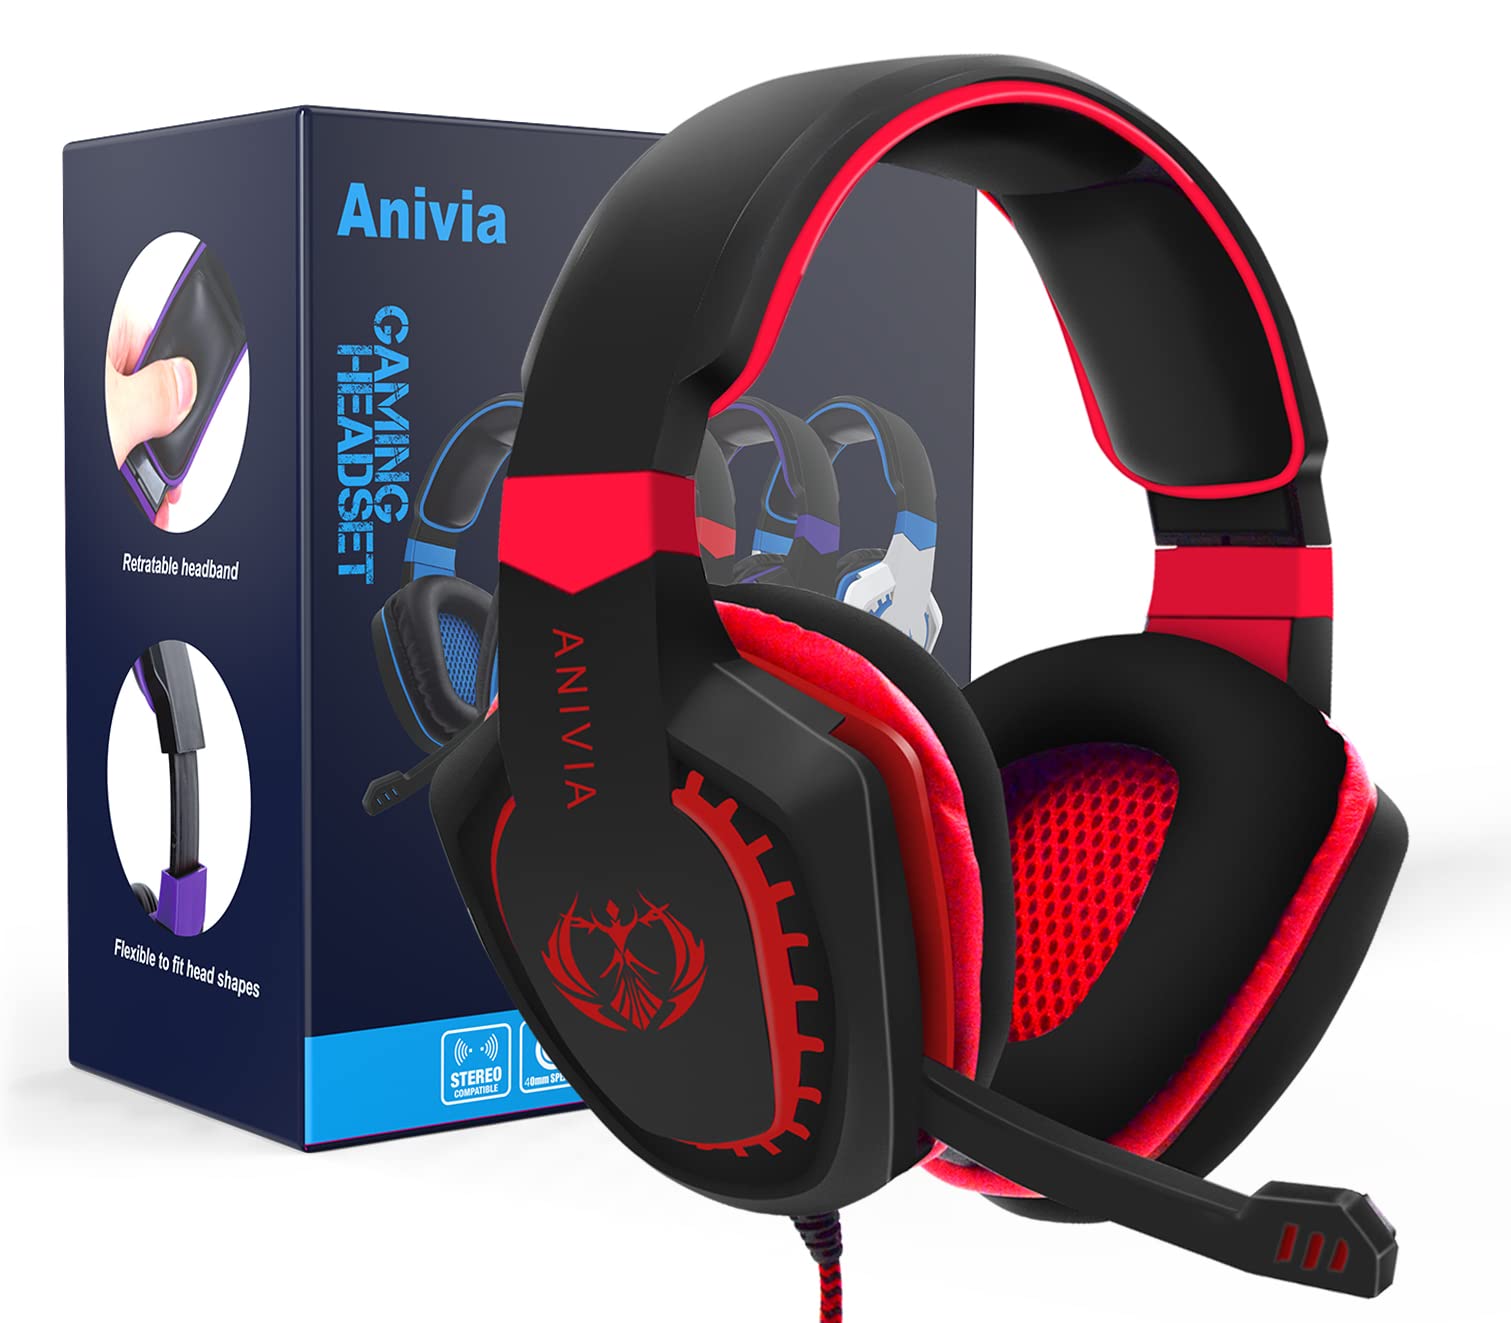 Anivia AH28 Over Ear Headphones Wired Stereo Computer Headsets Gaming Headset with Mic, Bass with Volume Control, Noise Isolating for Multi-Platforms